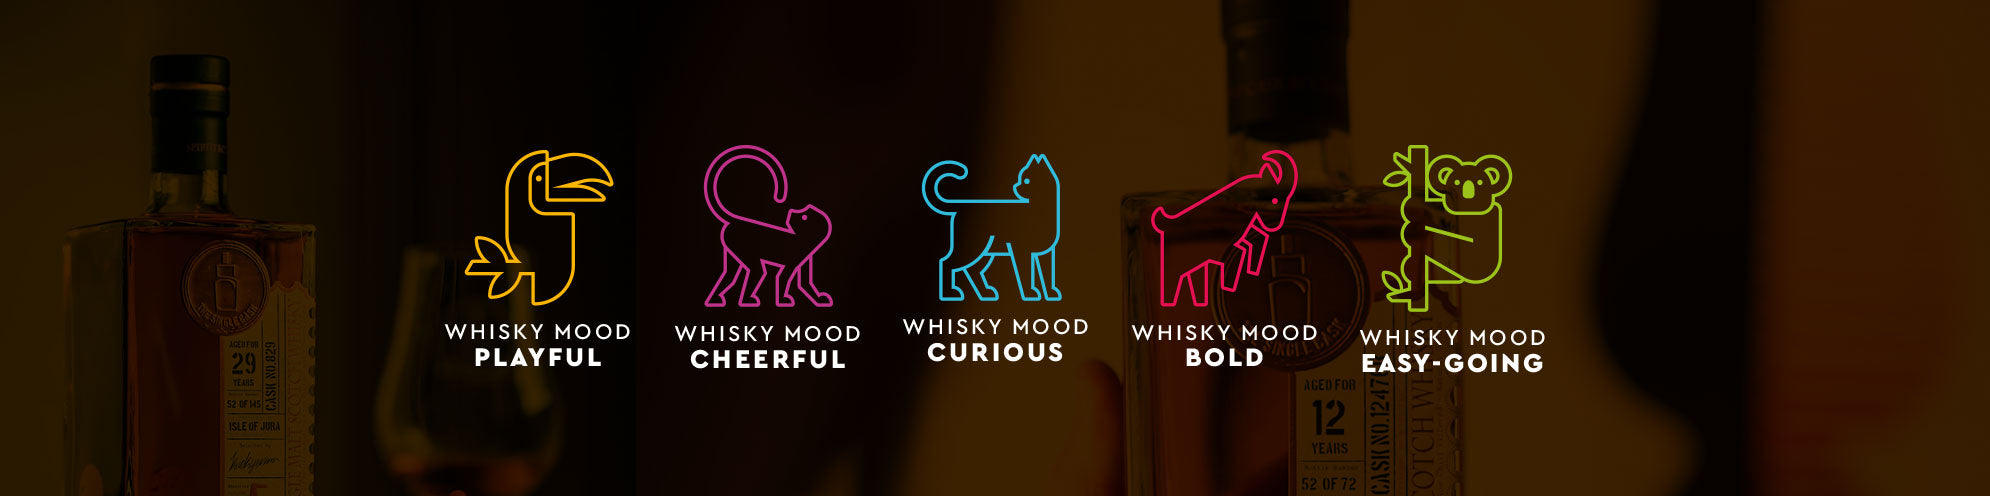 An exciting new way to taste Single Cask Whisky